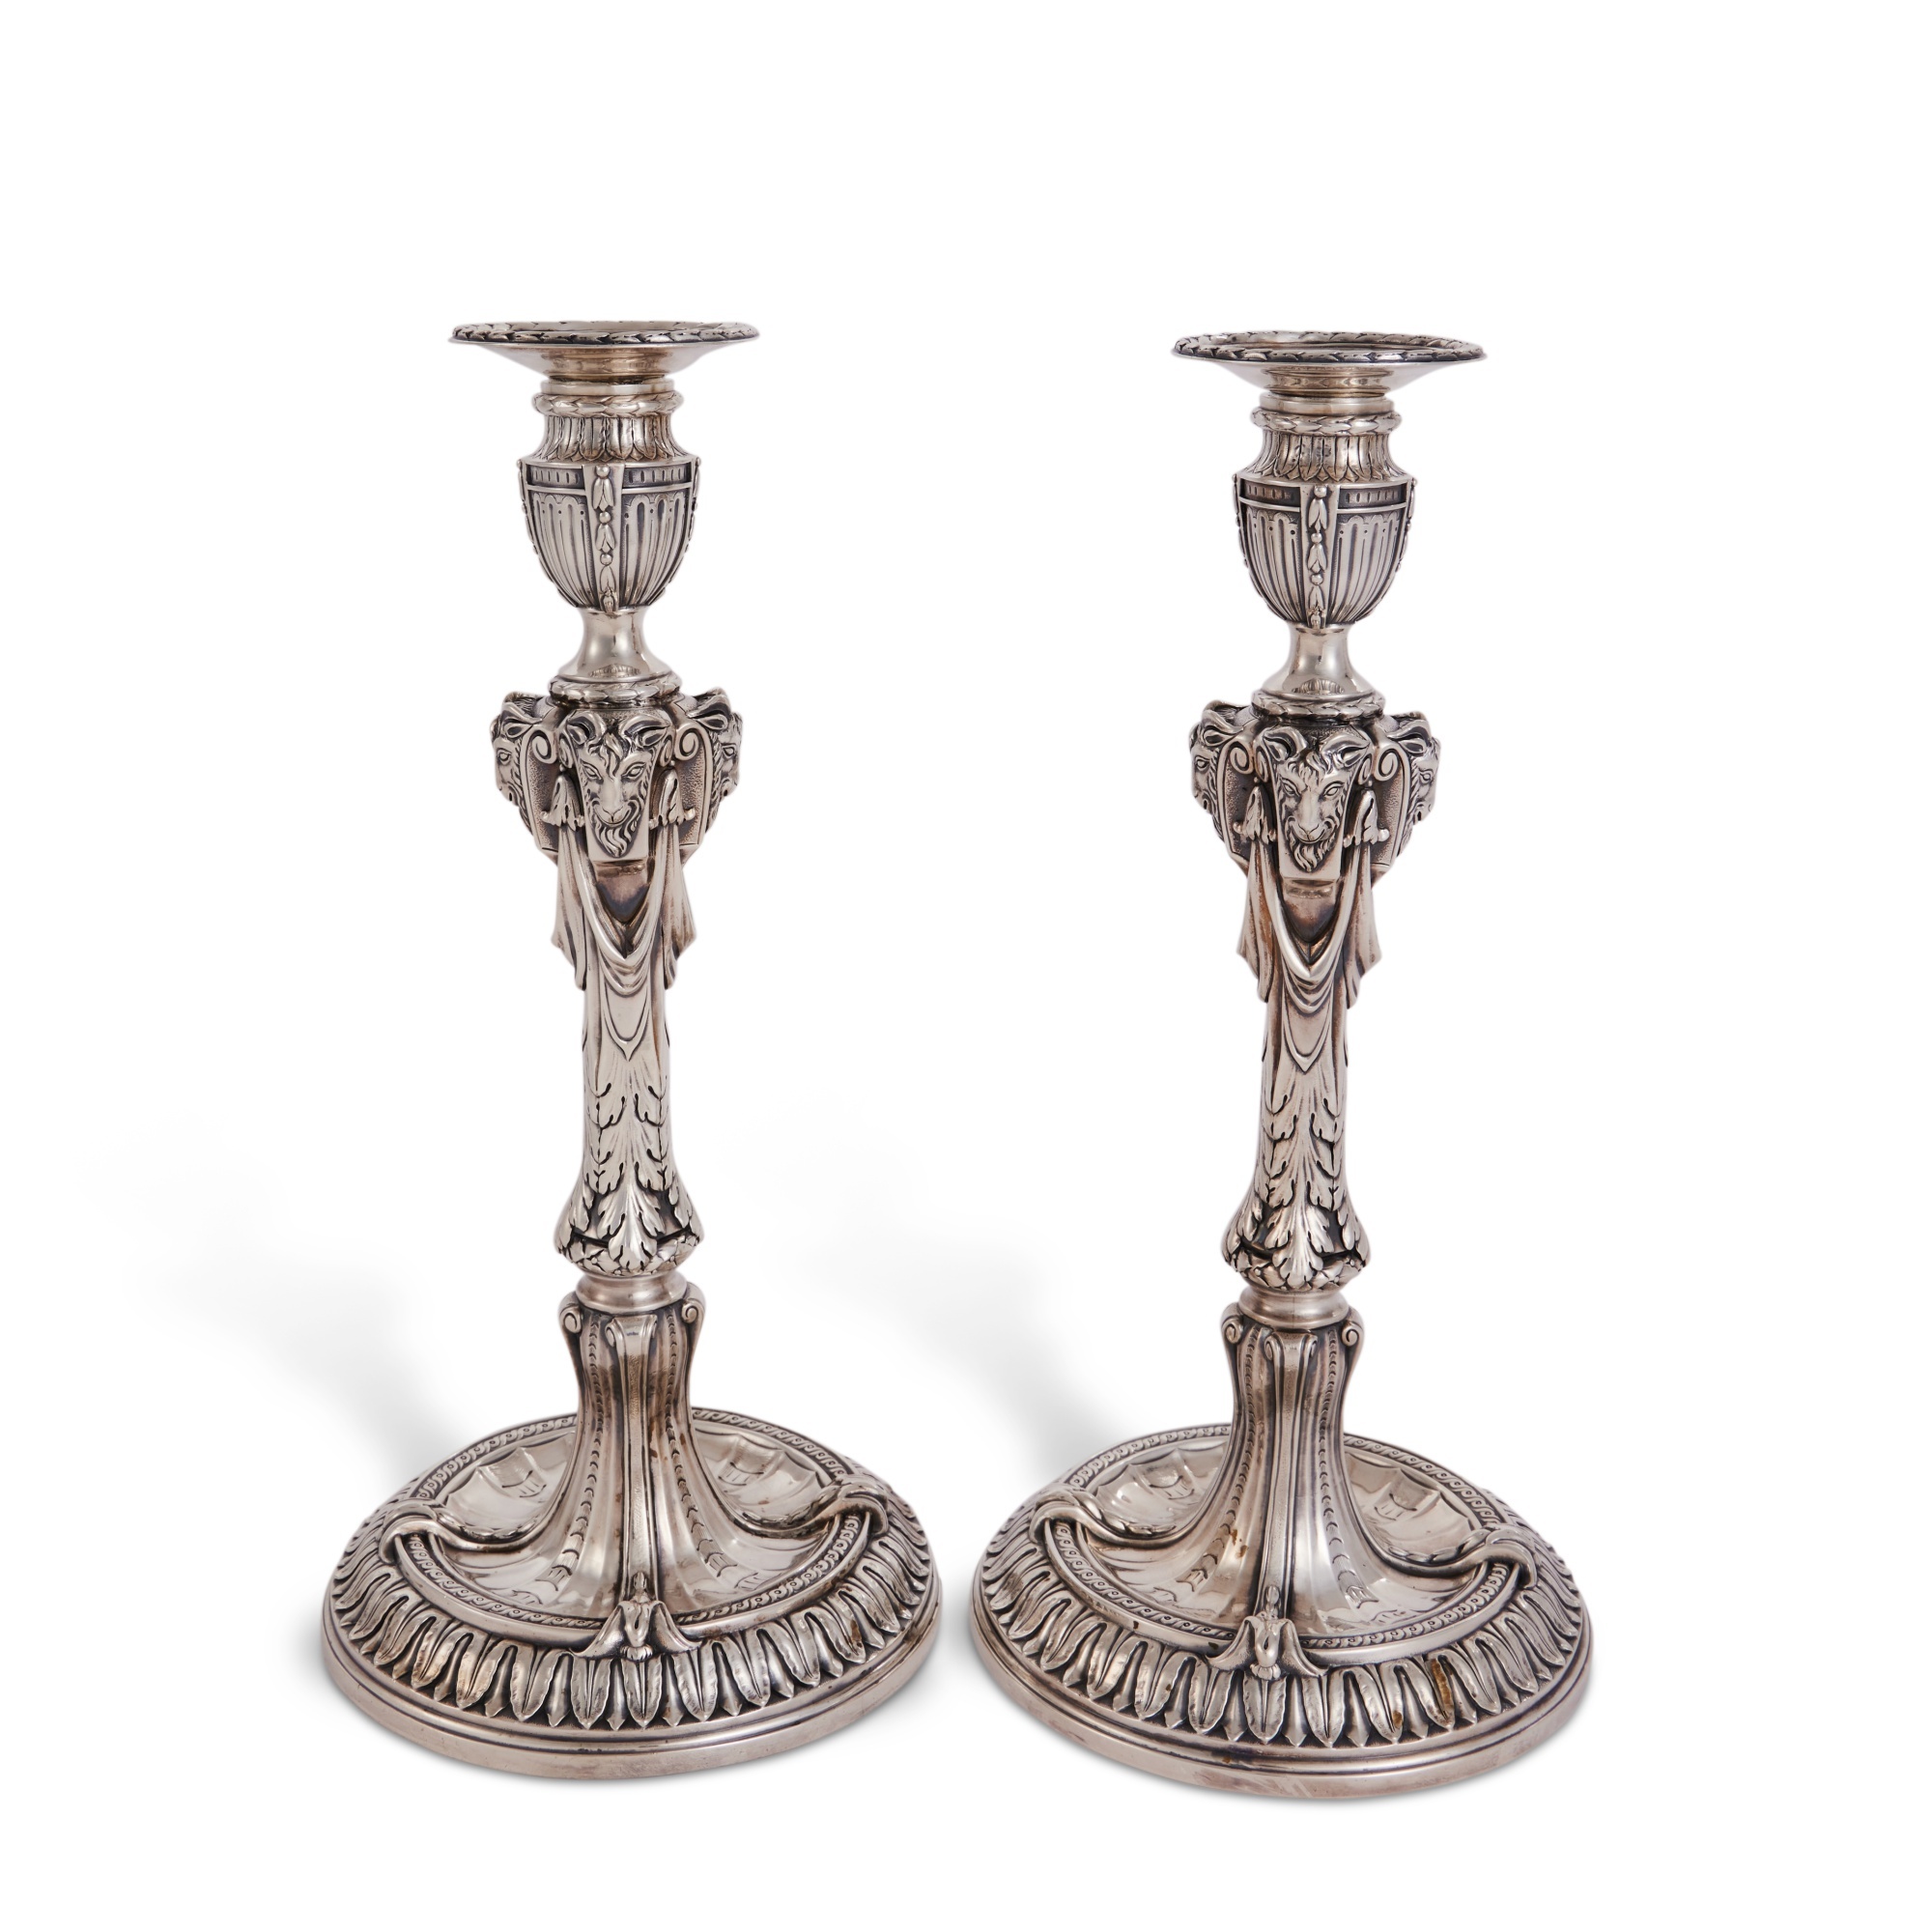 A Large Pair Of George III Silver Candlesticks, Frederick Kandler, London, 1777 - Image 2 of 6